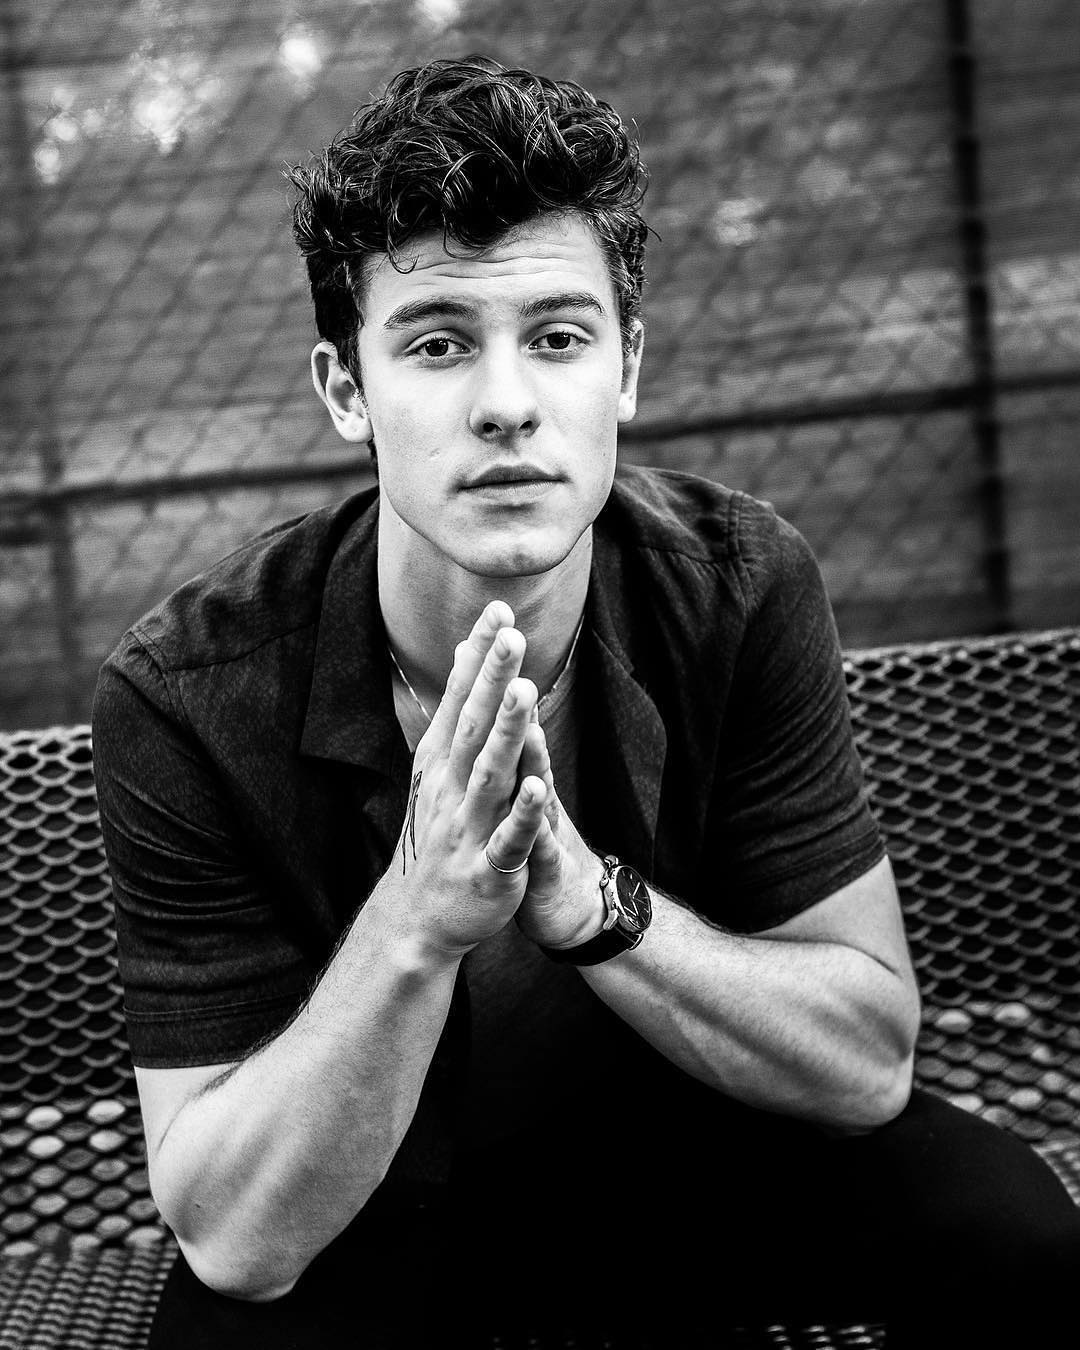 Shawn Mendes Image HD Wallpaper And Background